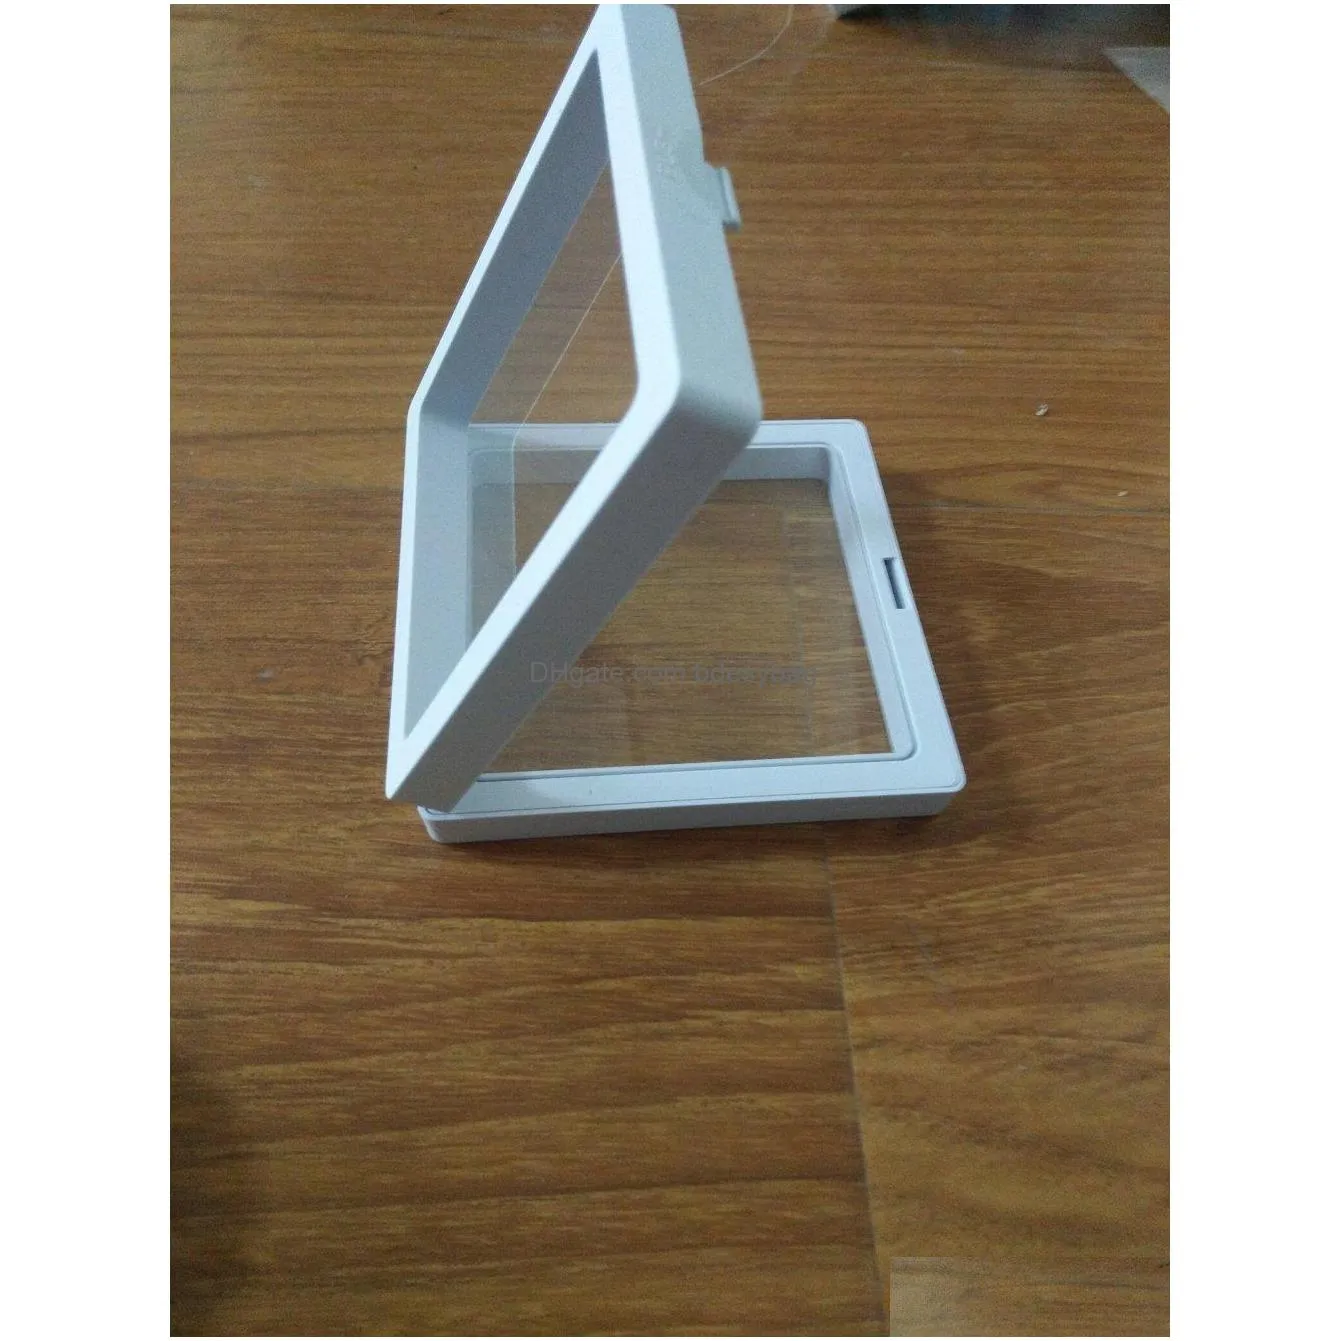 square 3d album floating frame 9 cm coin holder box jewelry collections display show case home table decorative accessories